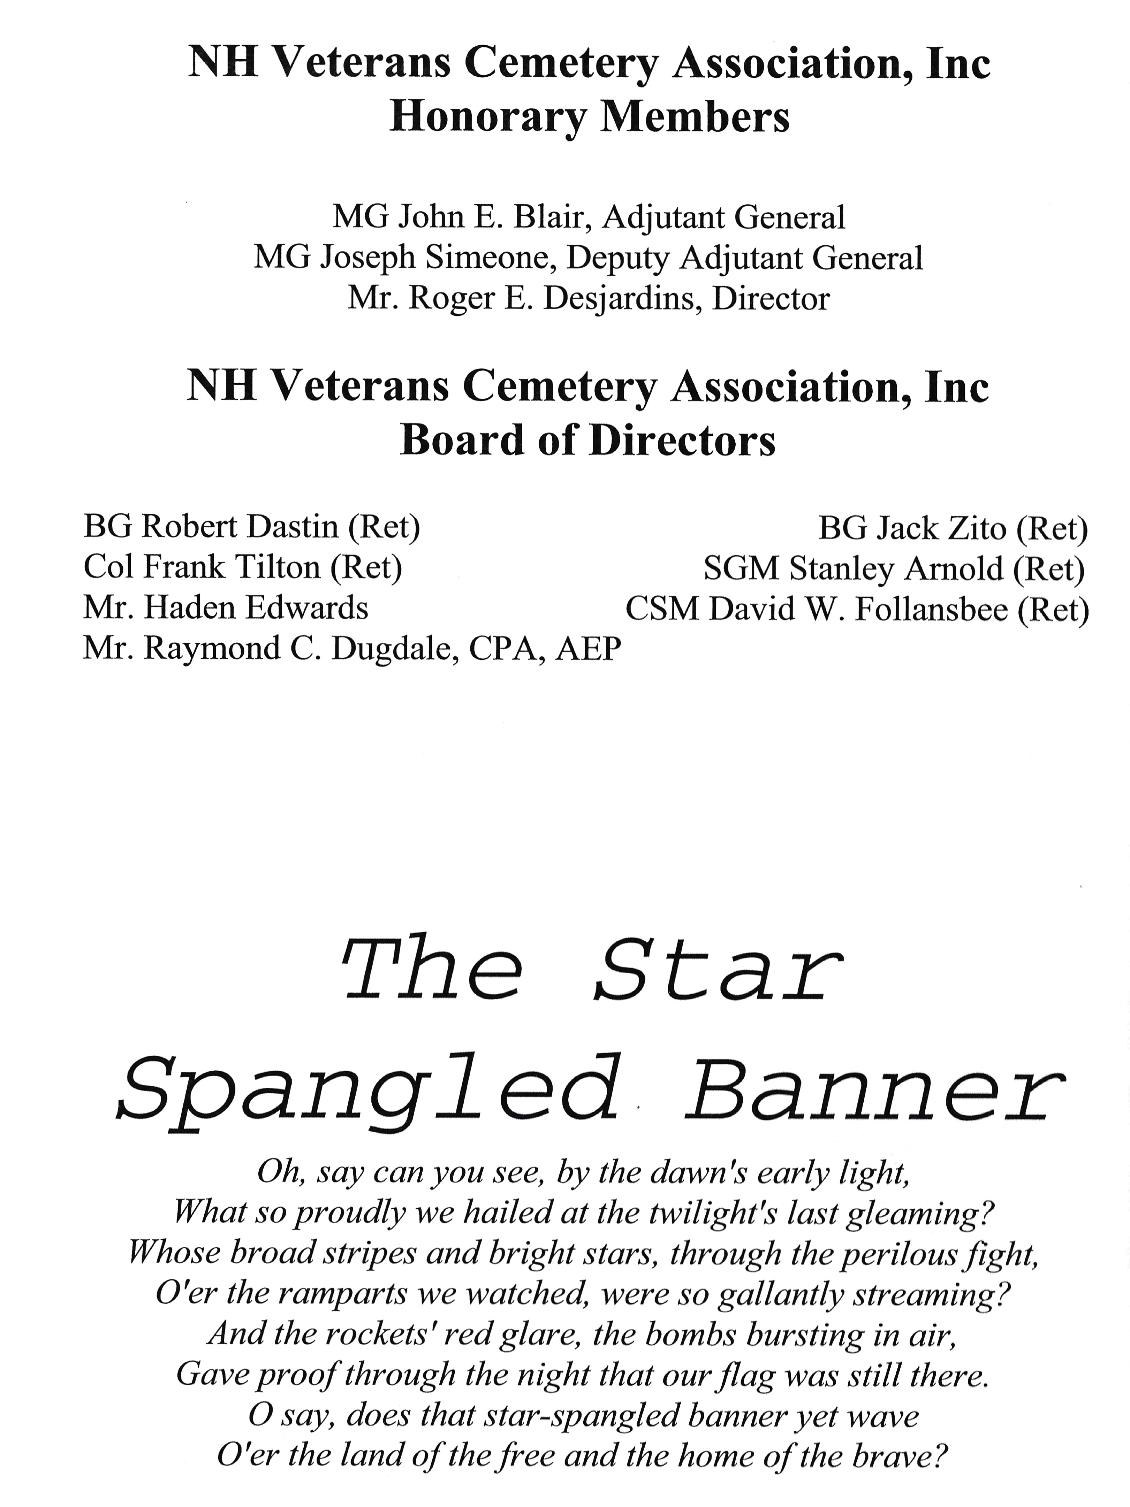 Memorial Day Program at the NH State Veterans Cemetery May 30th 2002